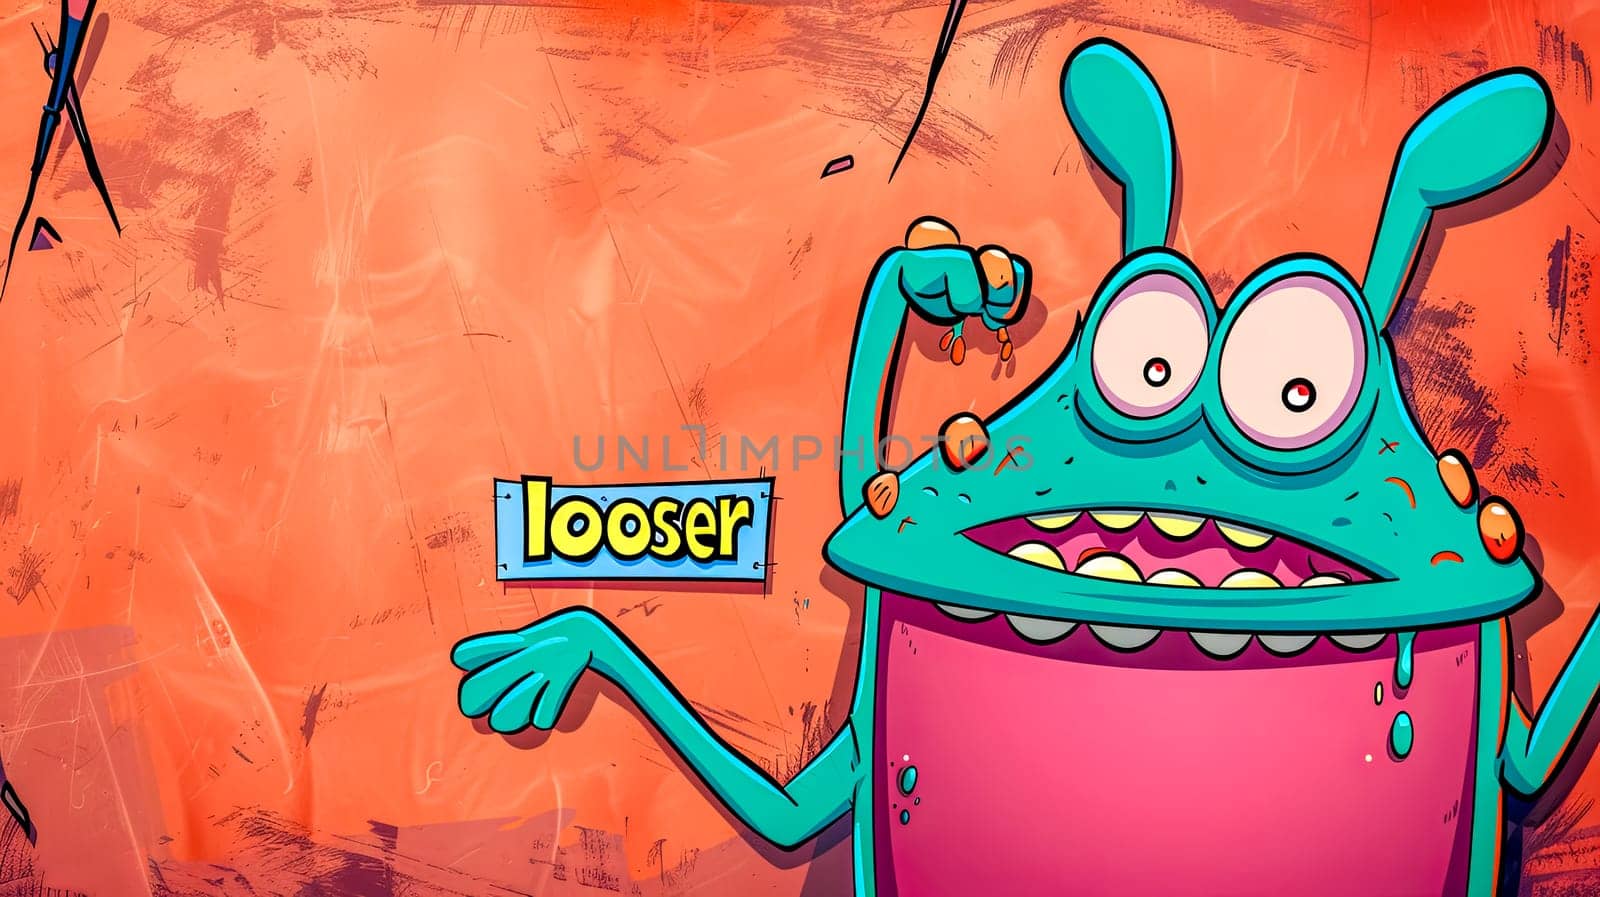 Funky animated monster with loser sign by Edophoto